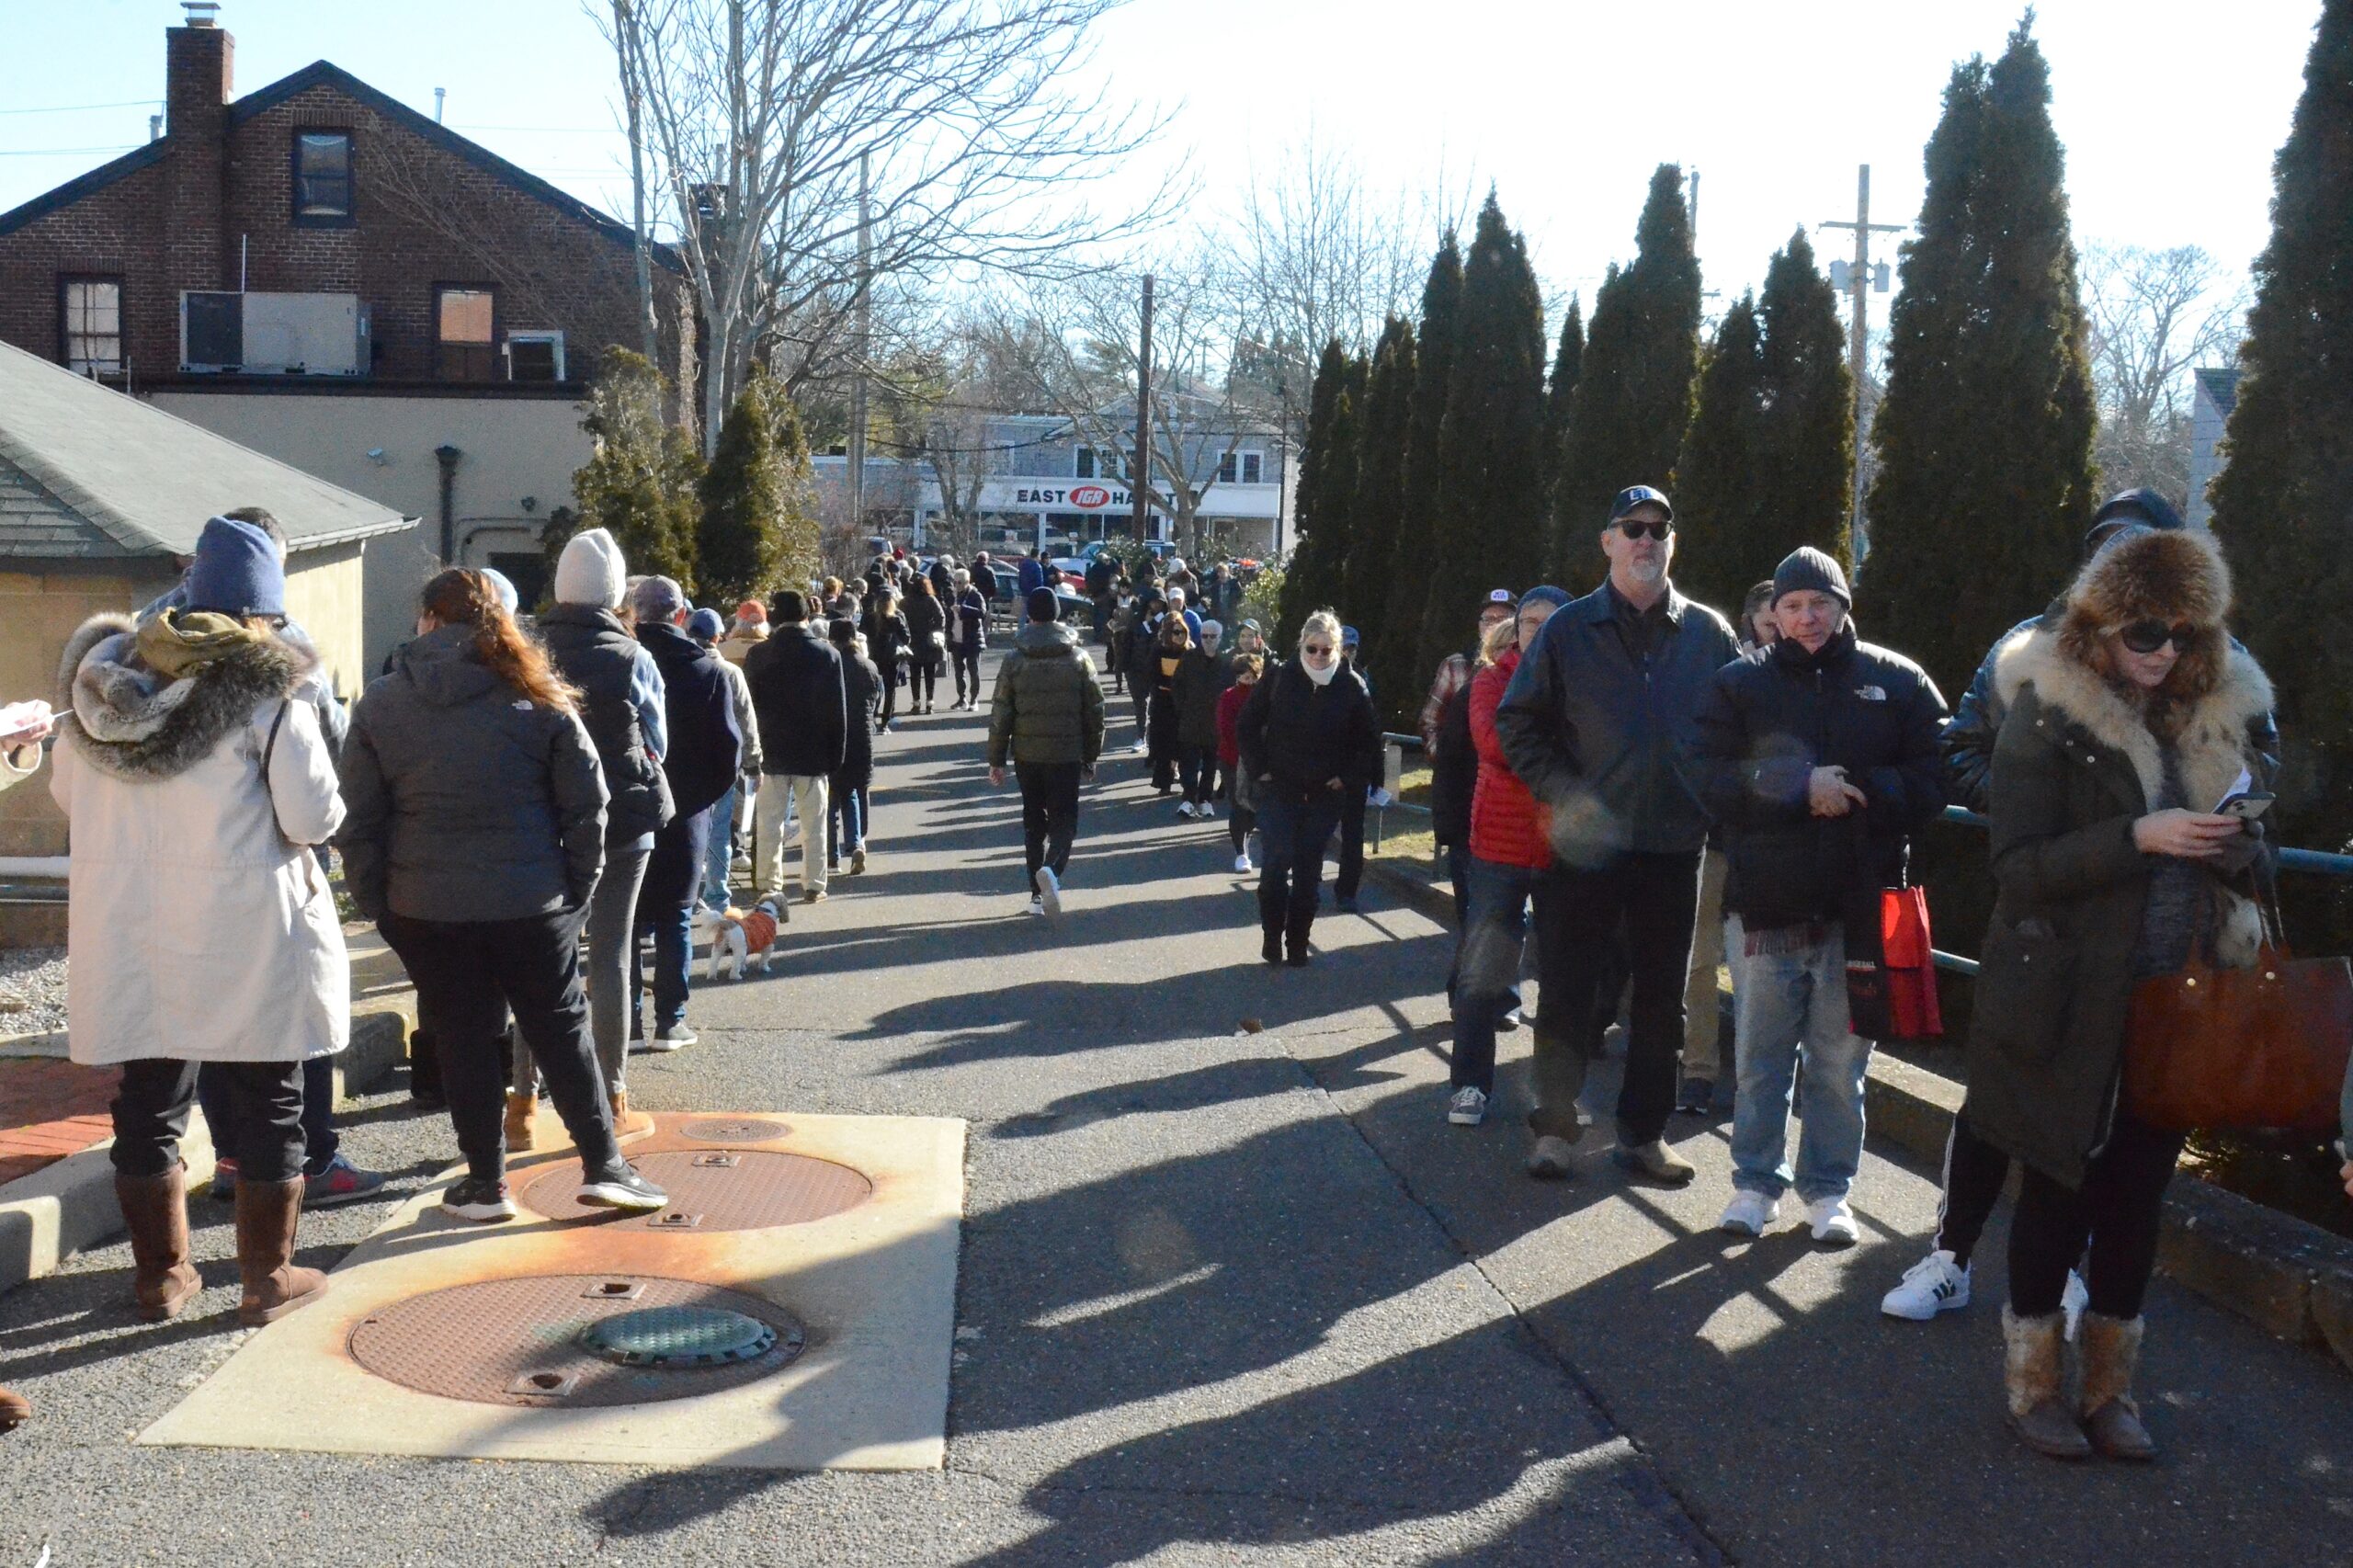 More than 1,000 local residents lined up at the East Hampton Village Emergency Services Building on Friday morning to buy a non-resident beach parking permits for the village's beaches. 
Kyril Bromley